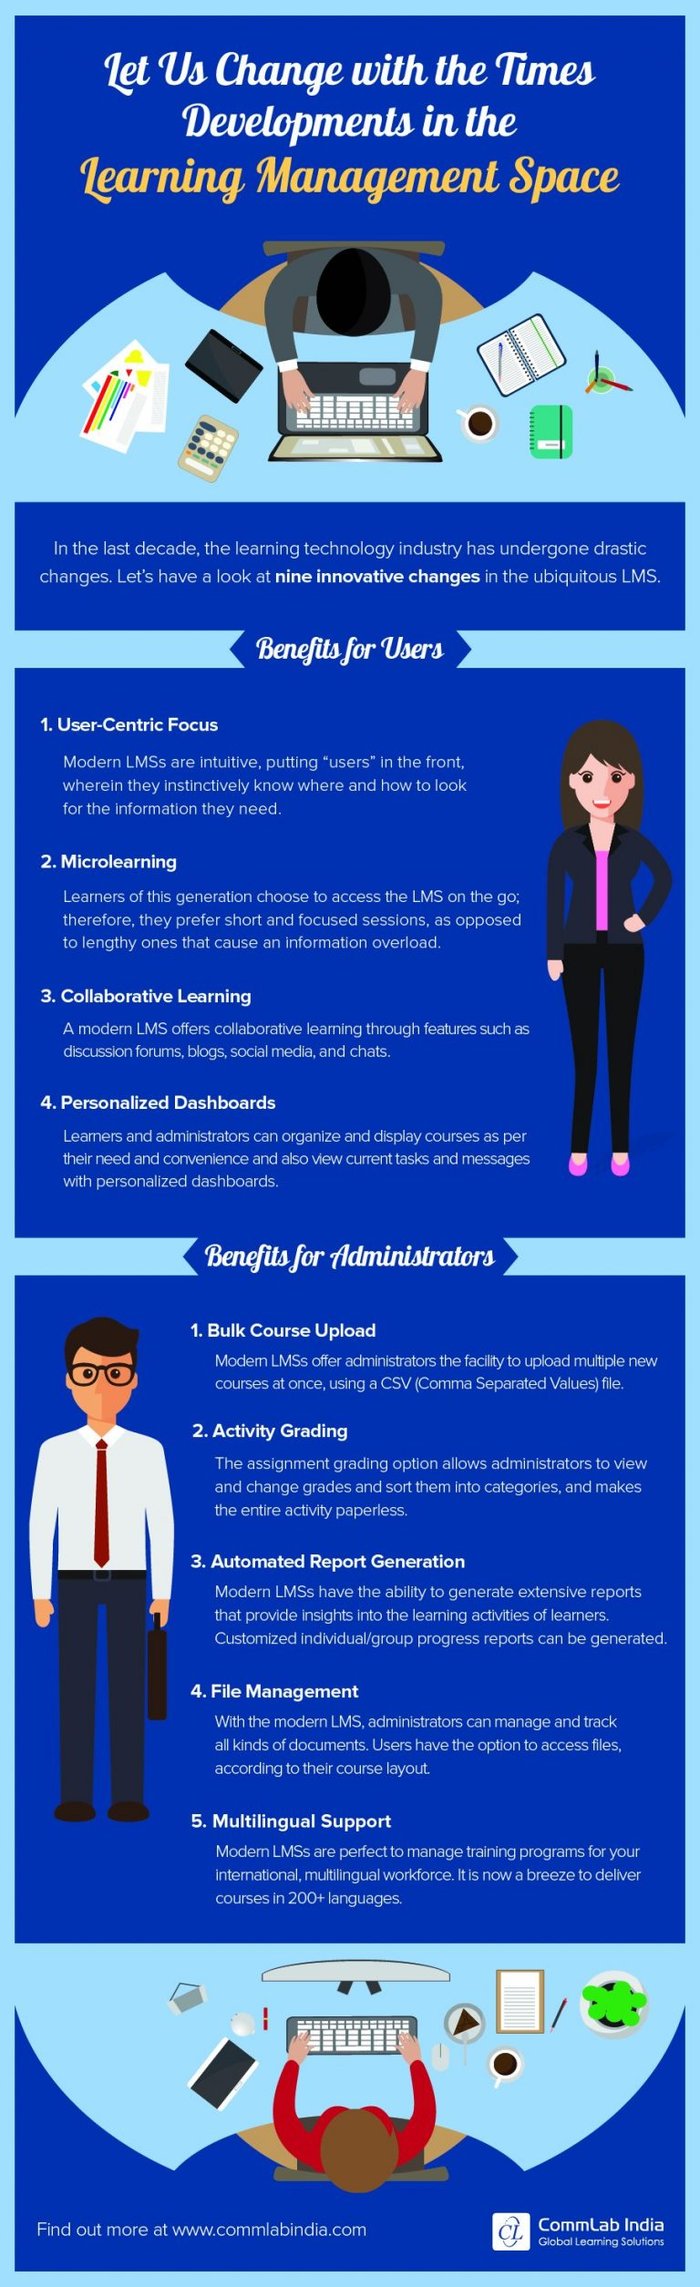 developments-in-the-learning-management-space-infographic-768x2510